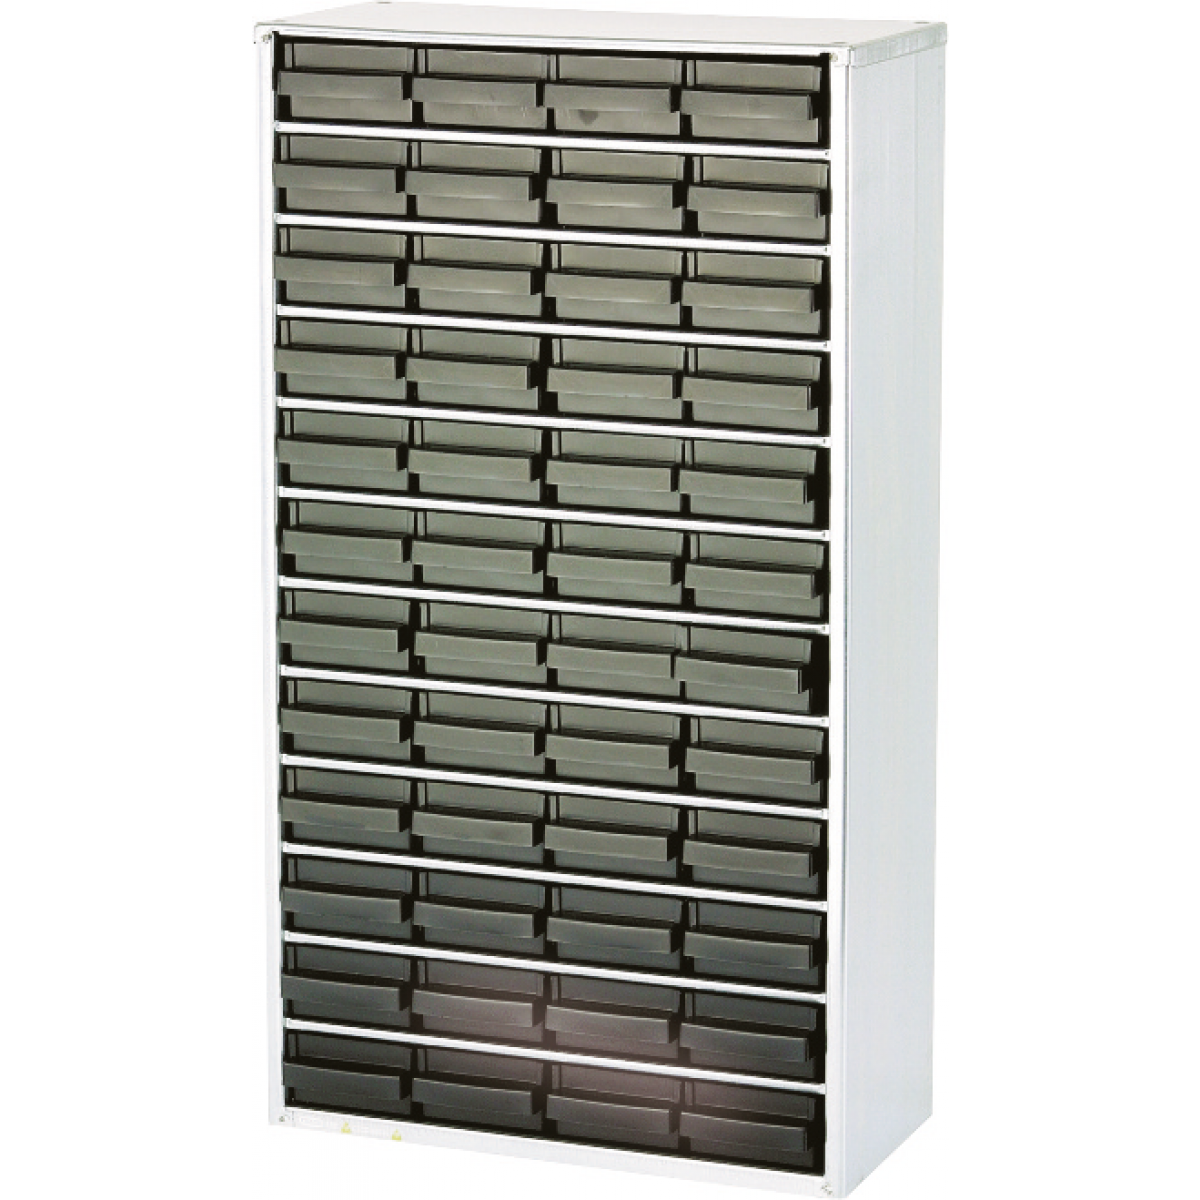 External dimensions (WxHxD):63 x 35 x 135 mm, Content:48 drawers